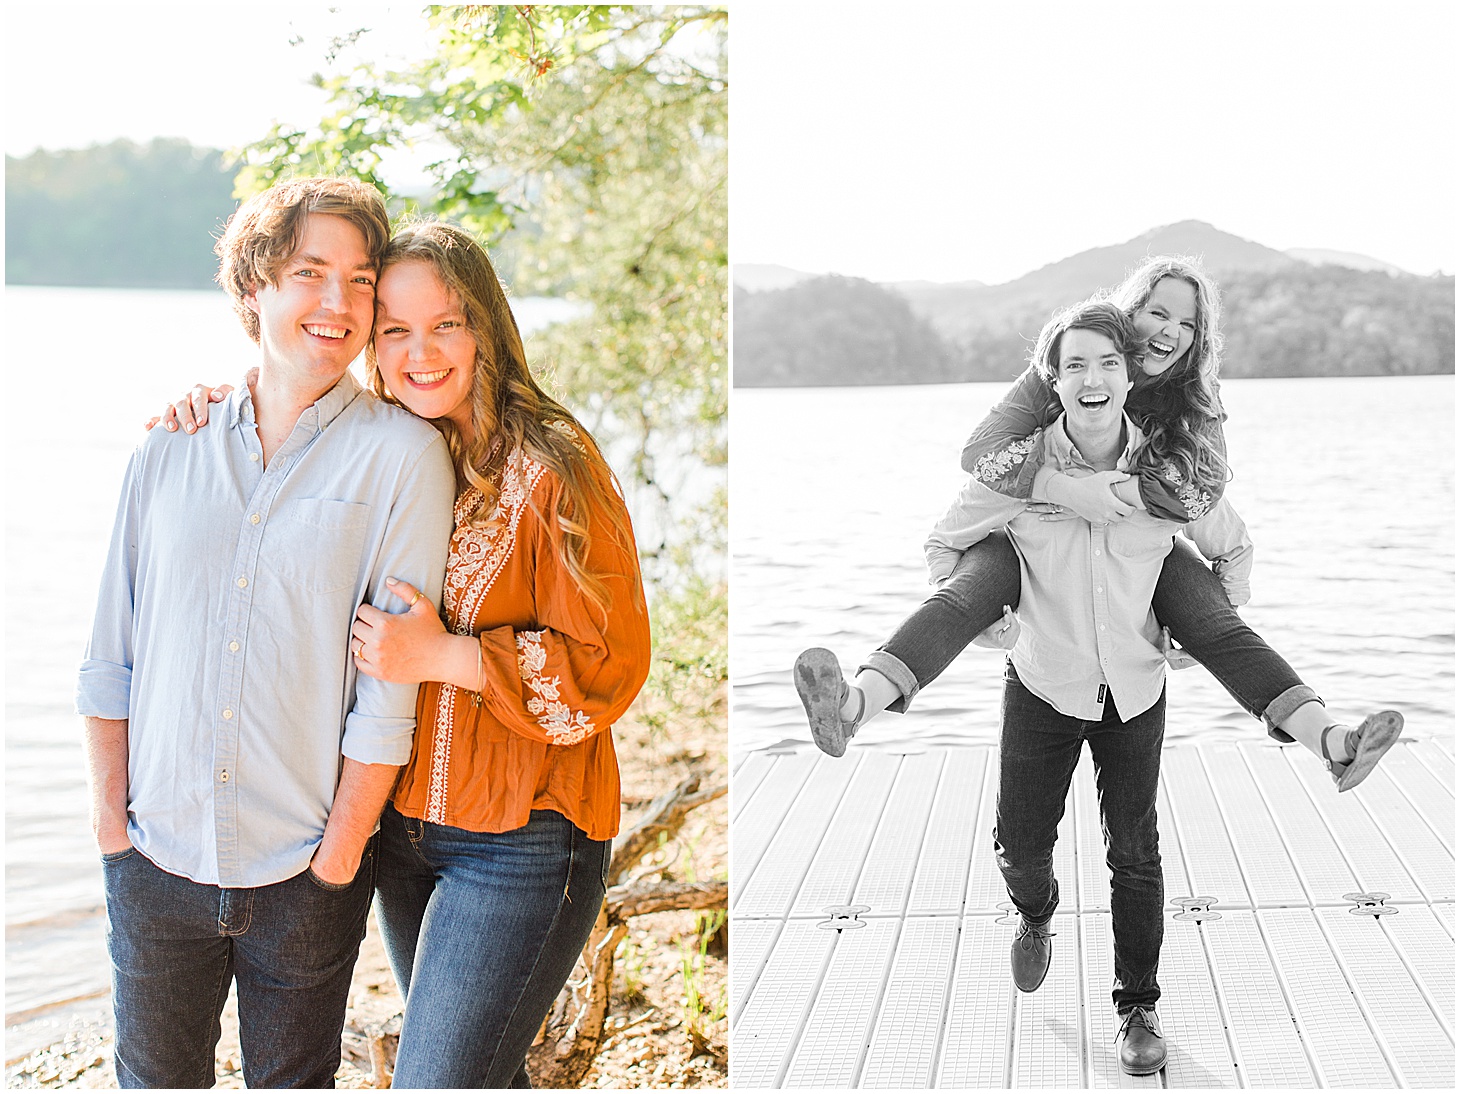 carvinscoveengagementsession_roanokeengagementsession_carvinscove_virginiawedding_virginiaweddingphotographer_vaweddingphotographer_photo_0004.jpg